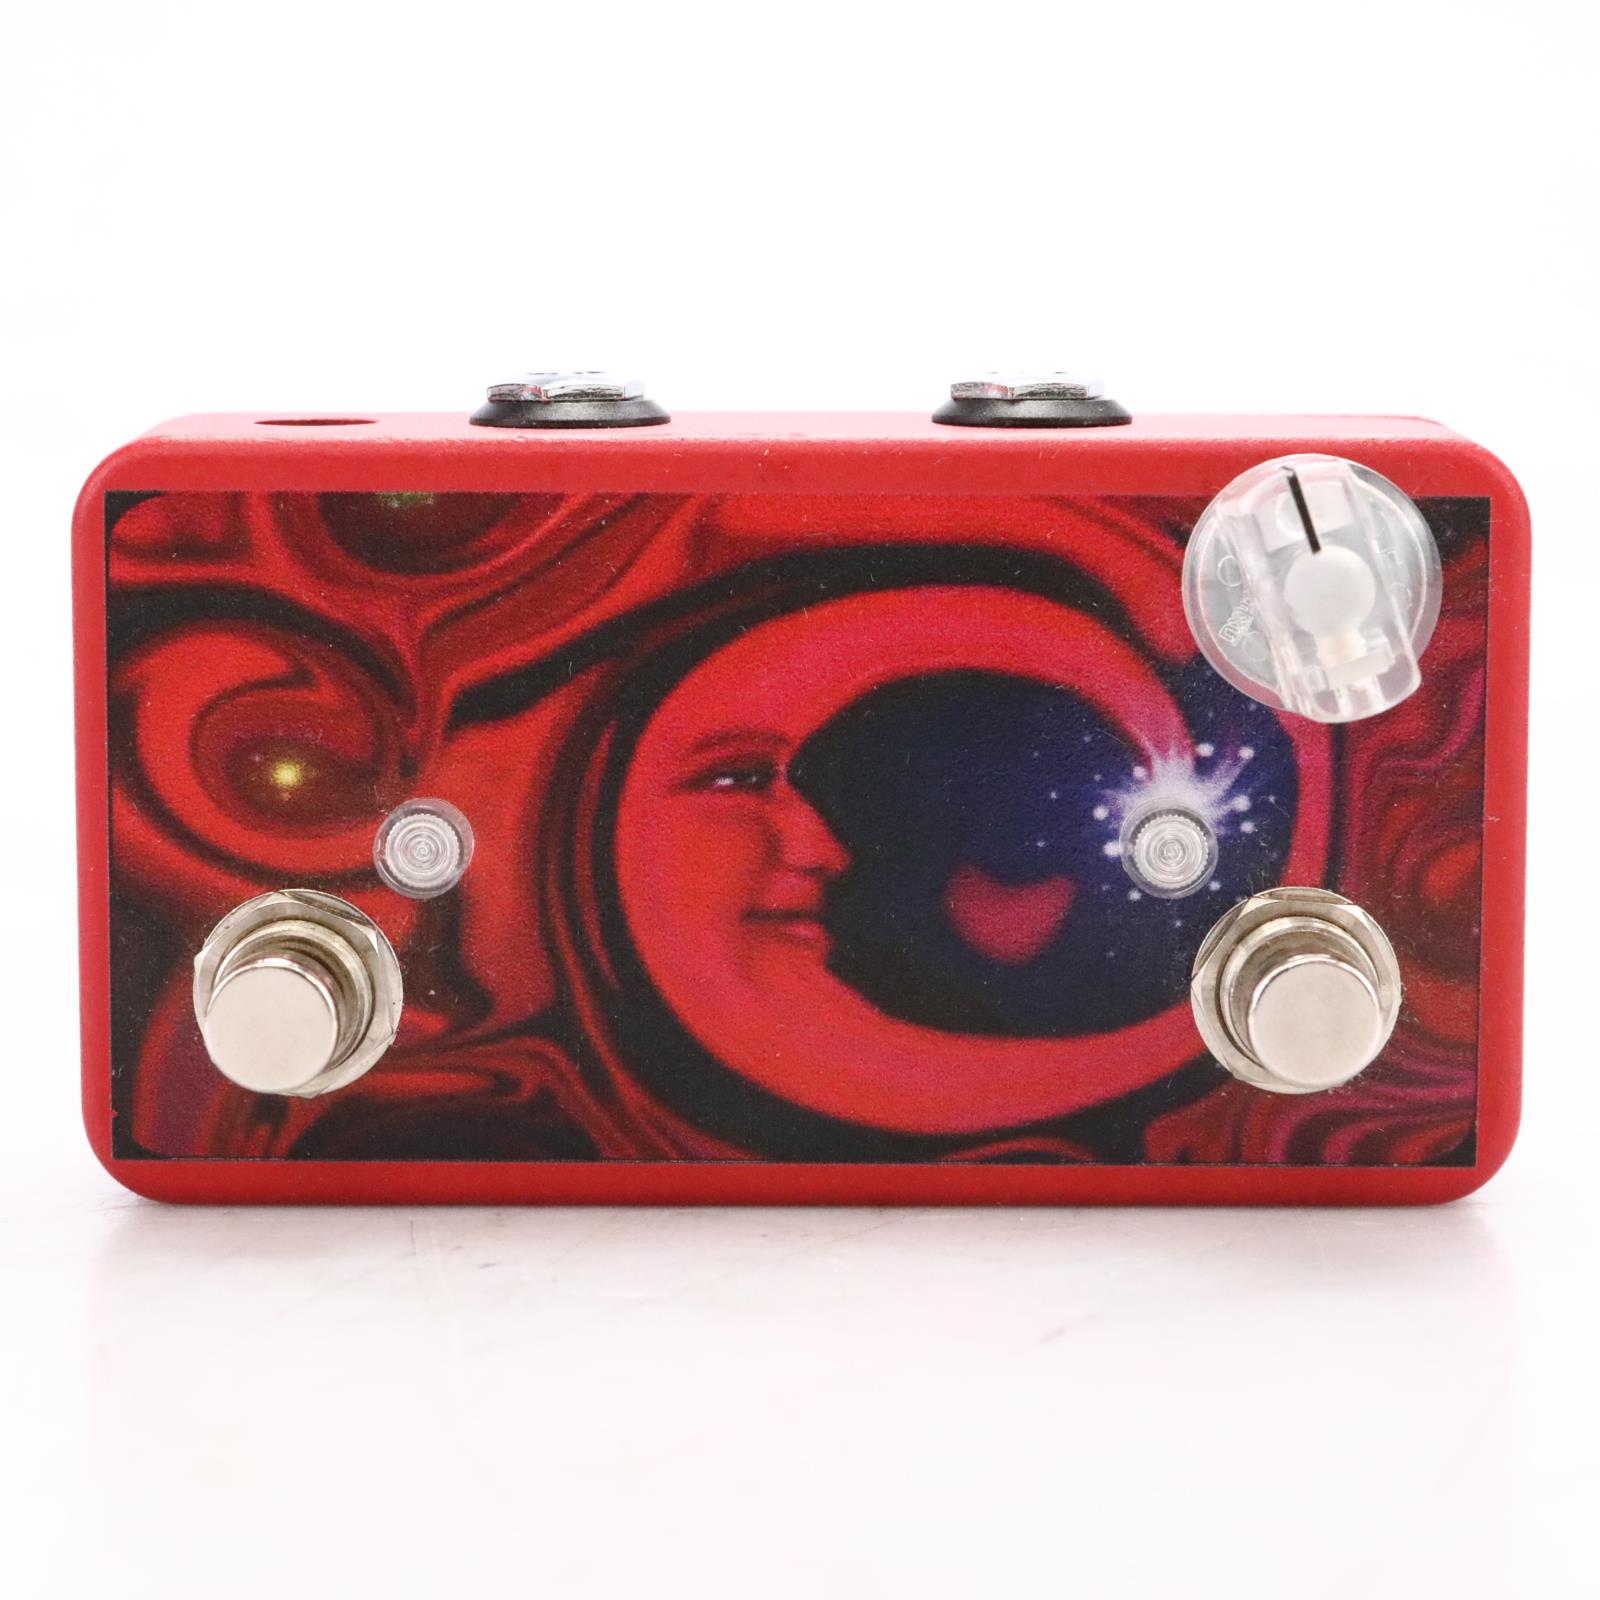 Lovepedal Tchula Red Moon Edition Overdrive Boost Guitar Effects Pedal #50208